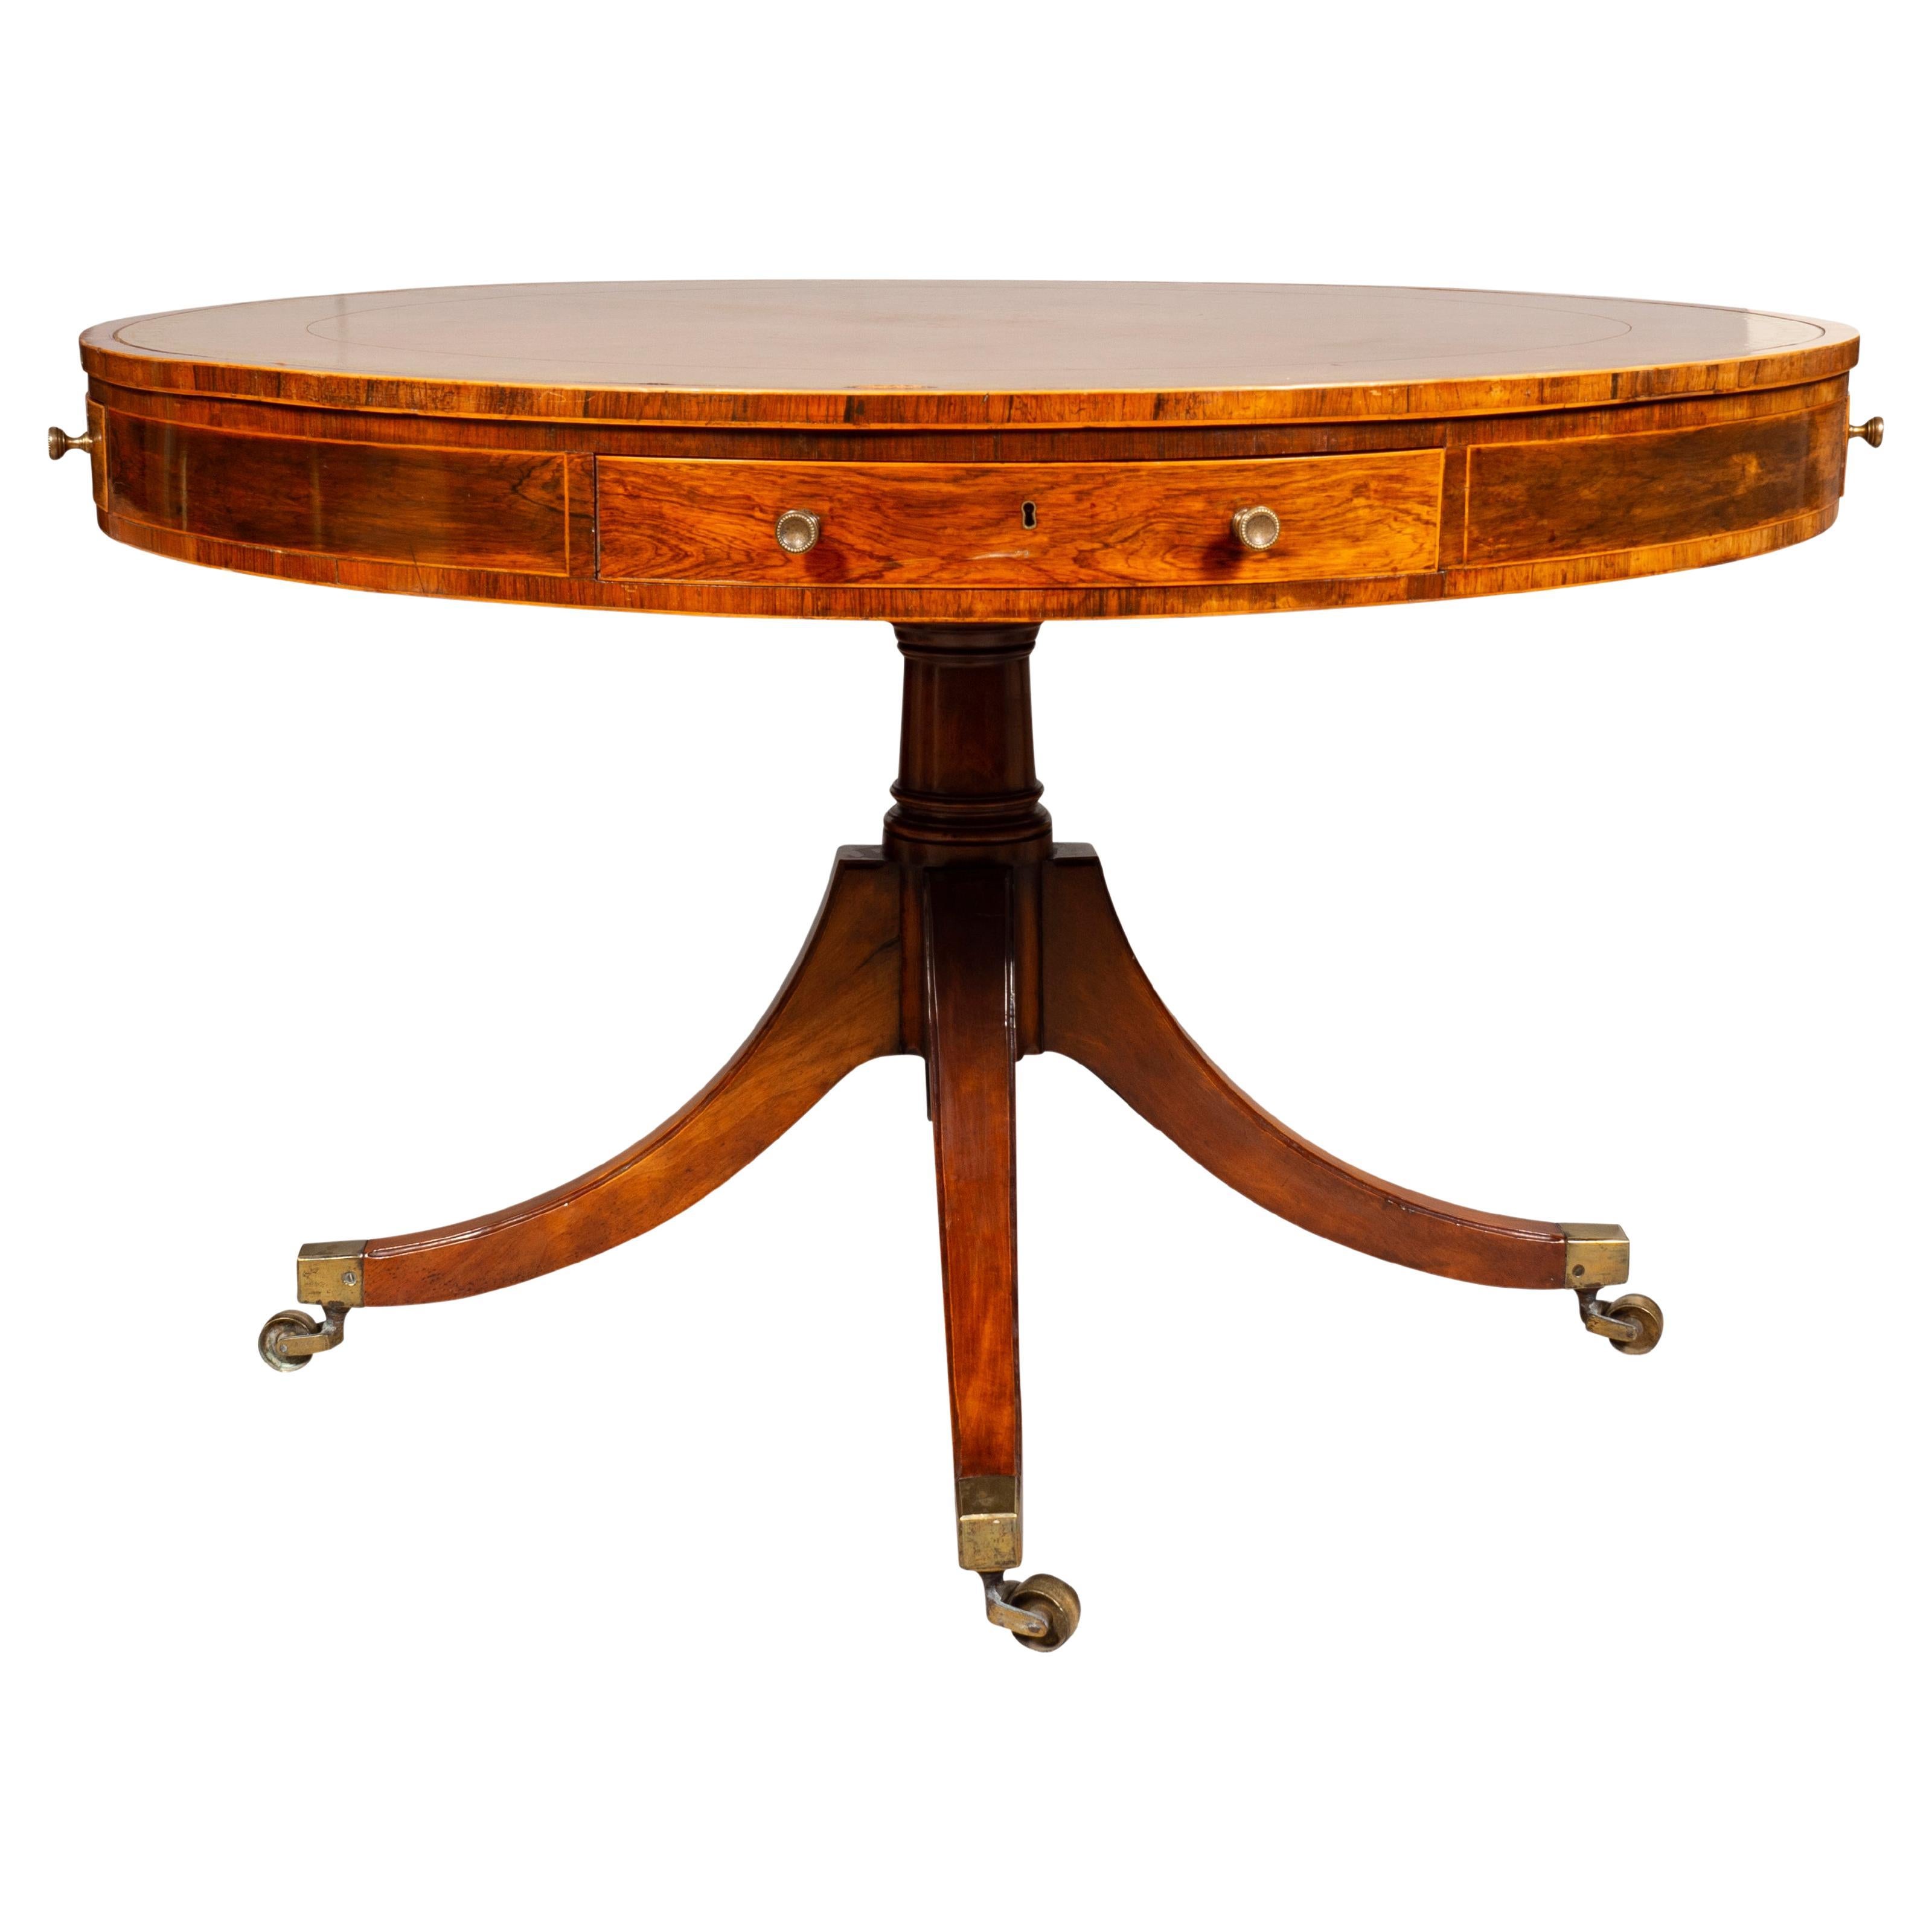 Late Regency Mahogany And Rosewood Drum Table